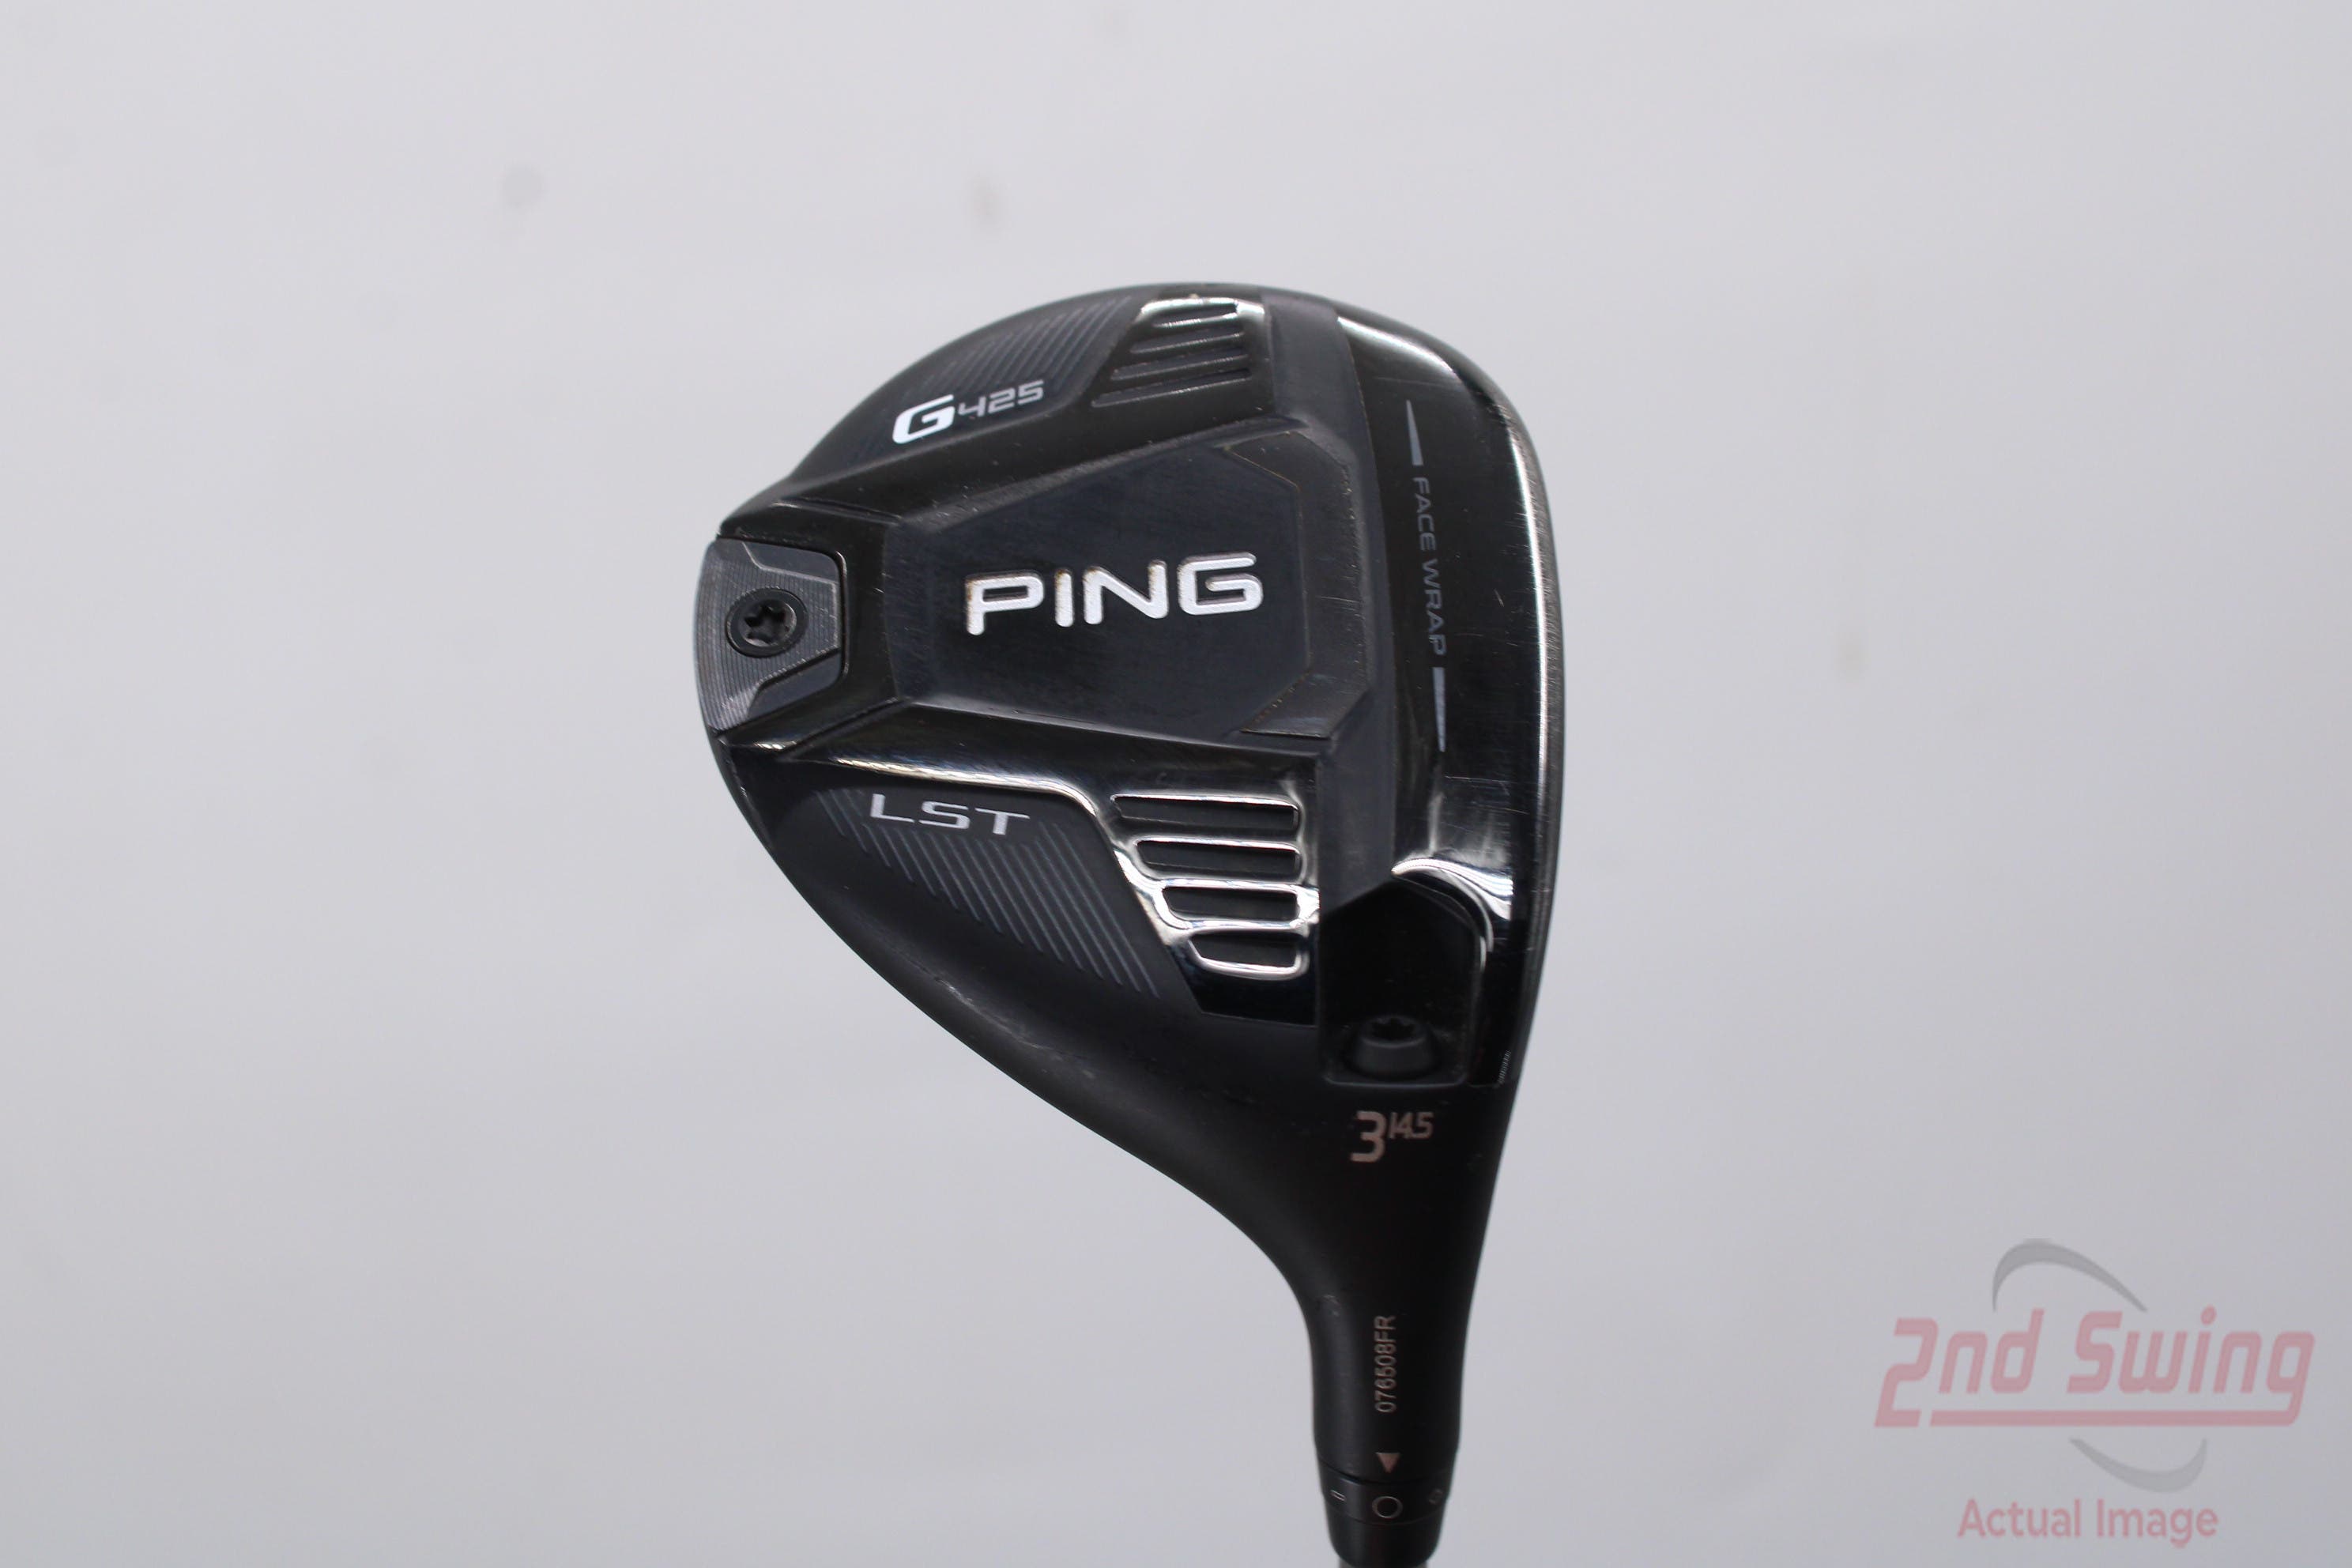 PING G425 3W 14.5 LST-